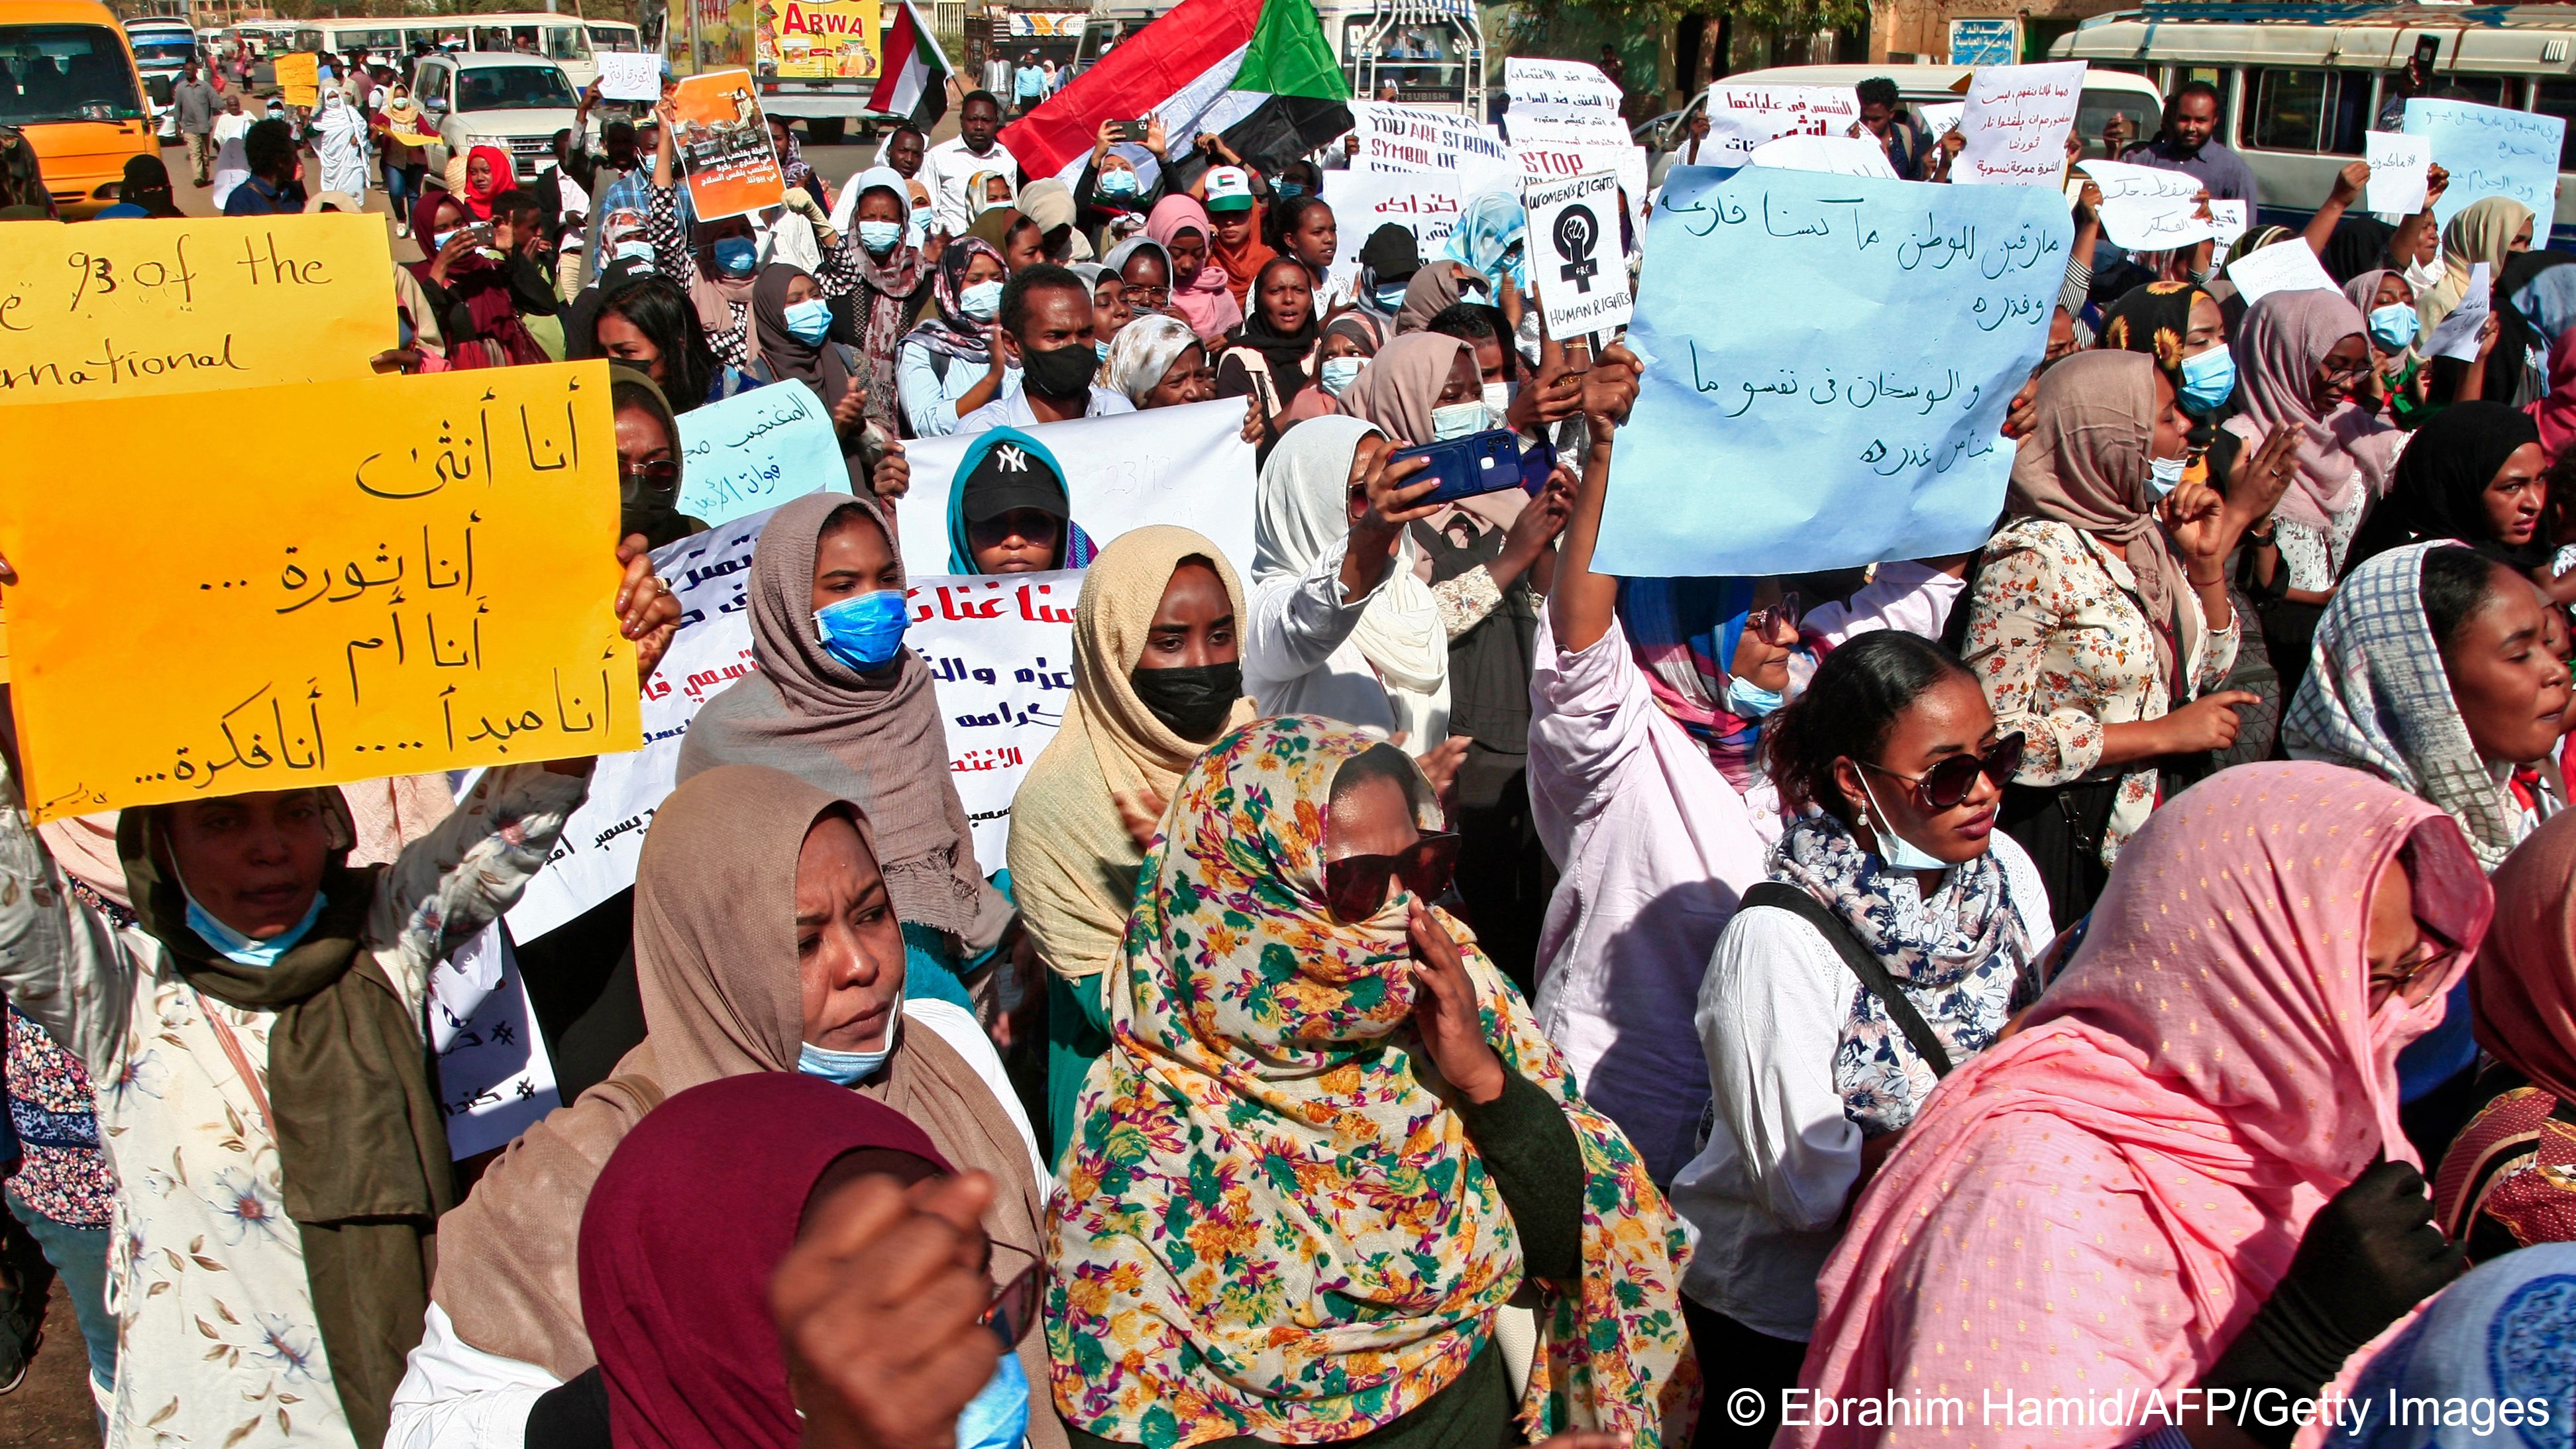 Sudanese women take part in a protest decrying sexual attacks, after the UN  said at least 13 women and girls were raped in the recent mass protests against the army, in Omdurman on 23 December 2021 (image: by Ebrahim HAMID/AFP)